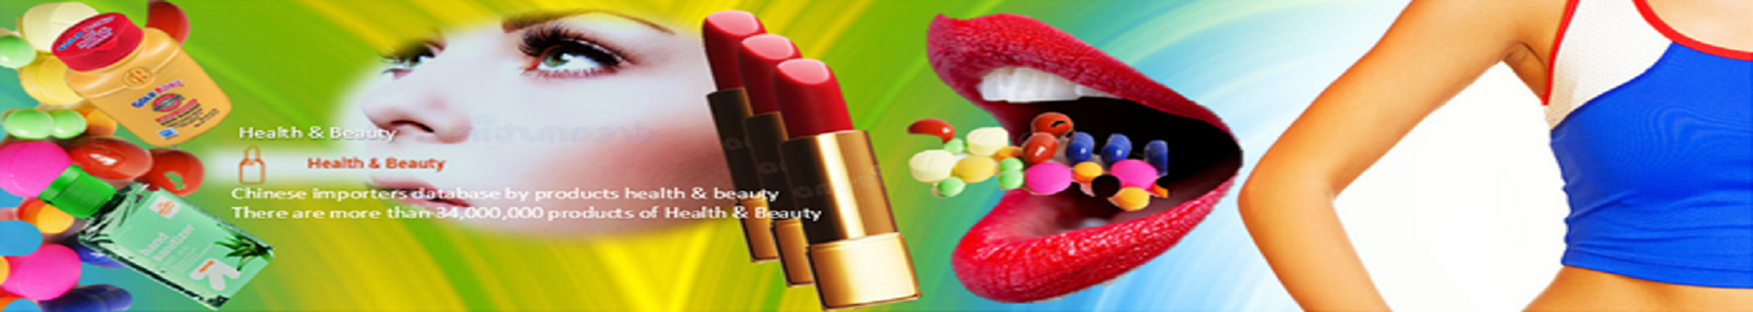 chinese-importers-databases-by-products-health-beauty-